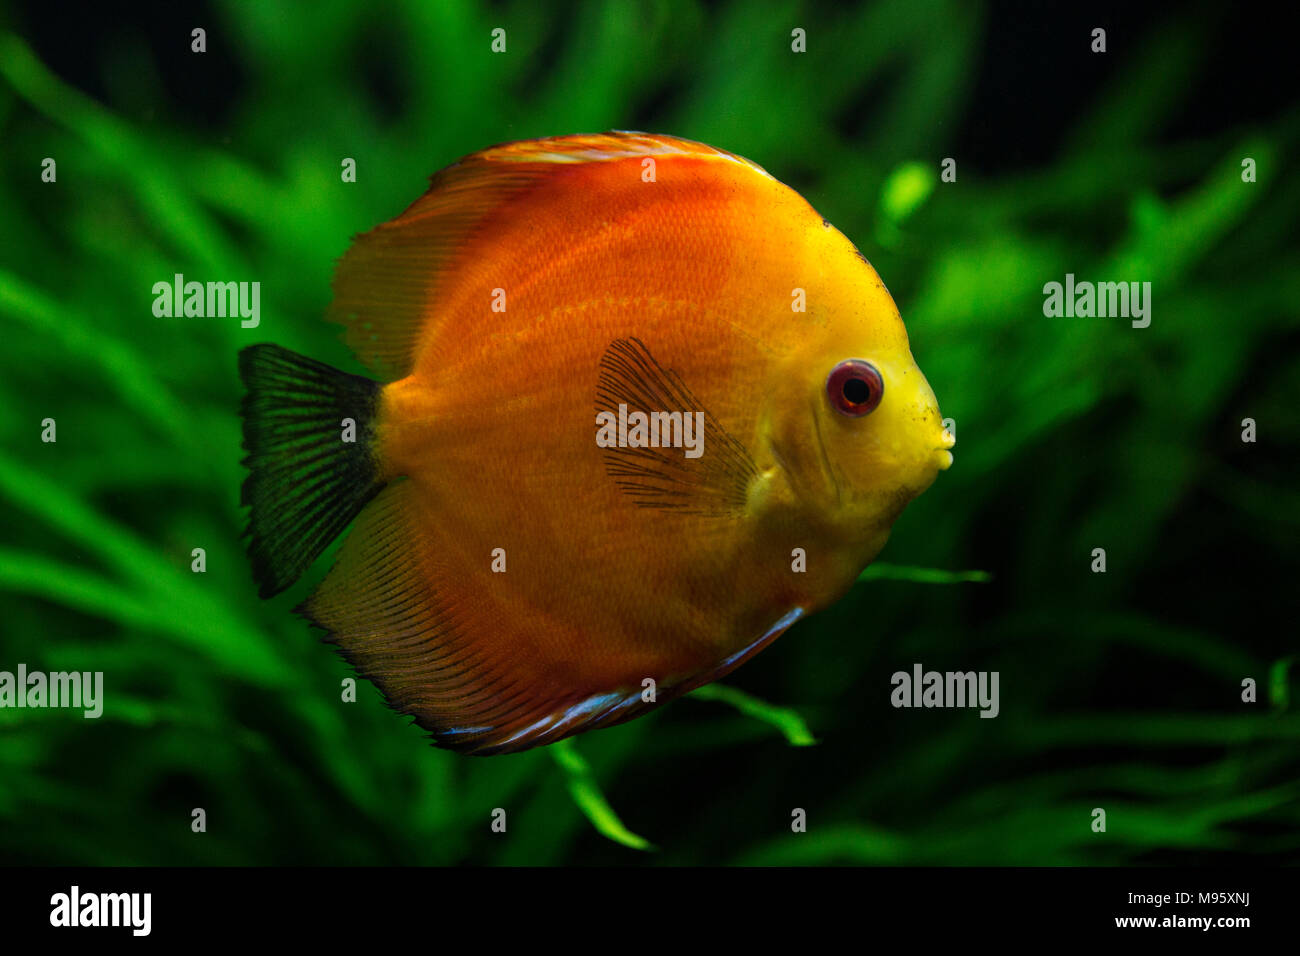 An orange and yellow discus (Symphysodon) or pompadour fish, native to the Amazon River. Stock Photo